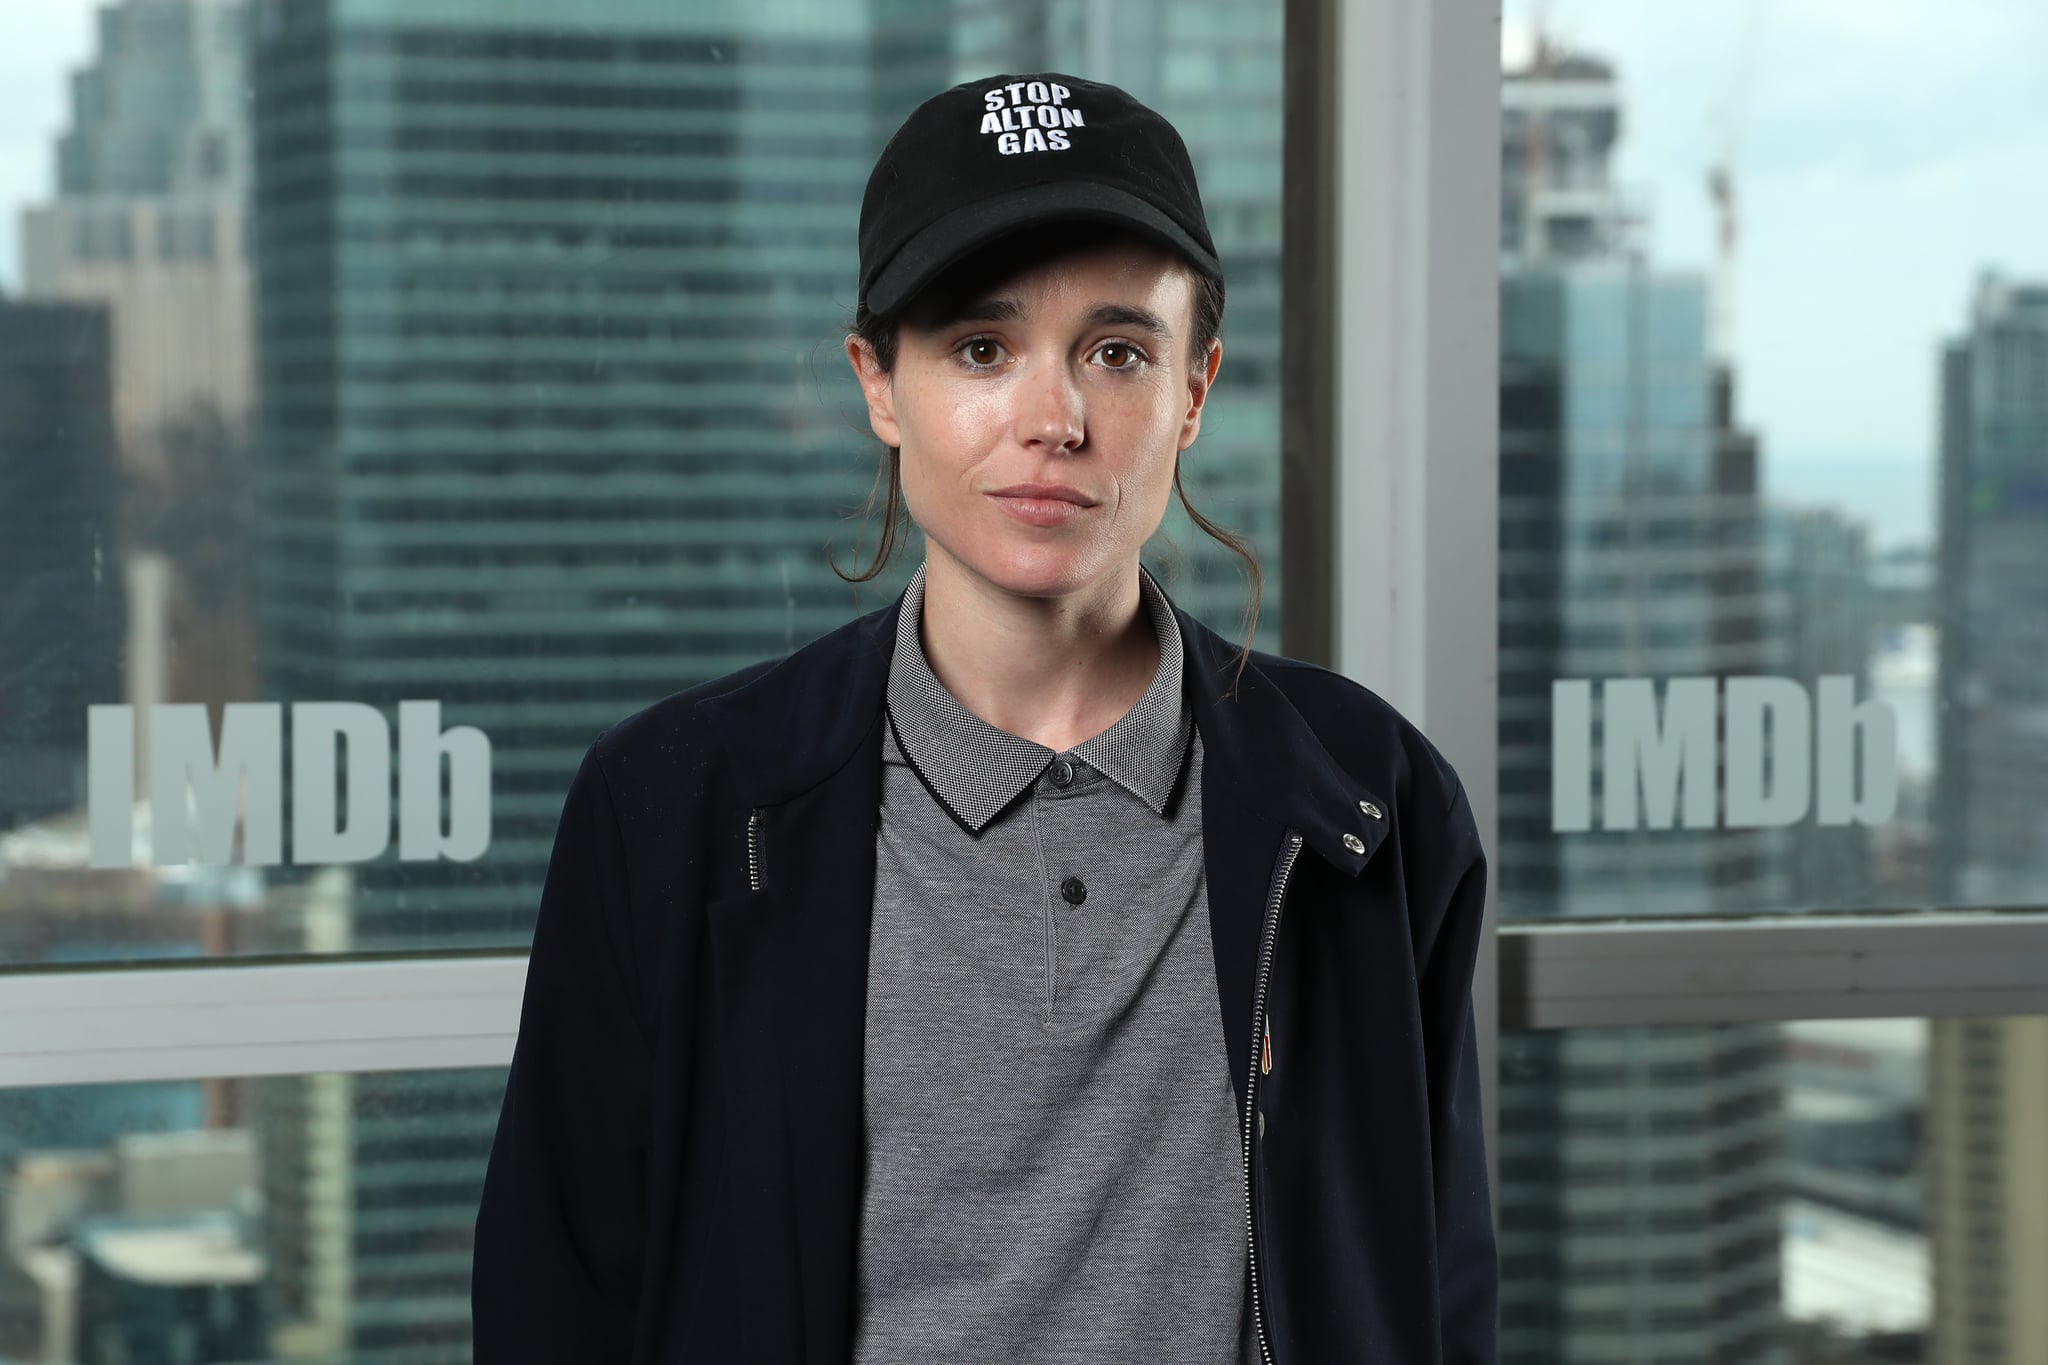 TORONTO, ONTARIO - SEPTEMBER 07: Ellen Page attends The IMDb Studio Presented By Intuit QuickBooks at Toronto 2019 at Bisha Hotel & Residences on September 07, 2019 in Toronto, Canada. (Photo by Rich Polk/Getty Images for IMDb)